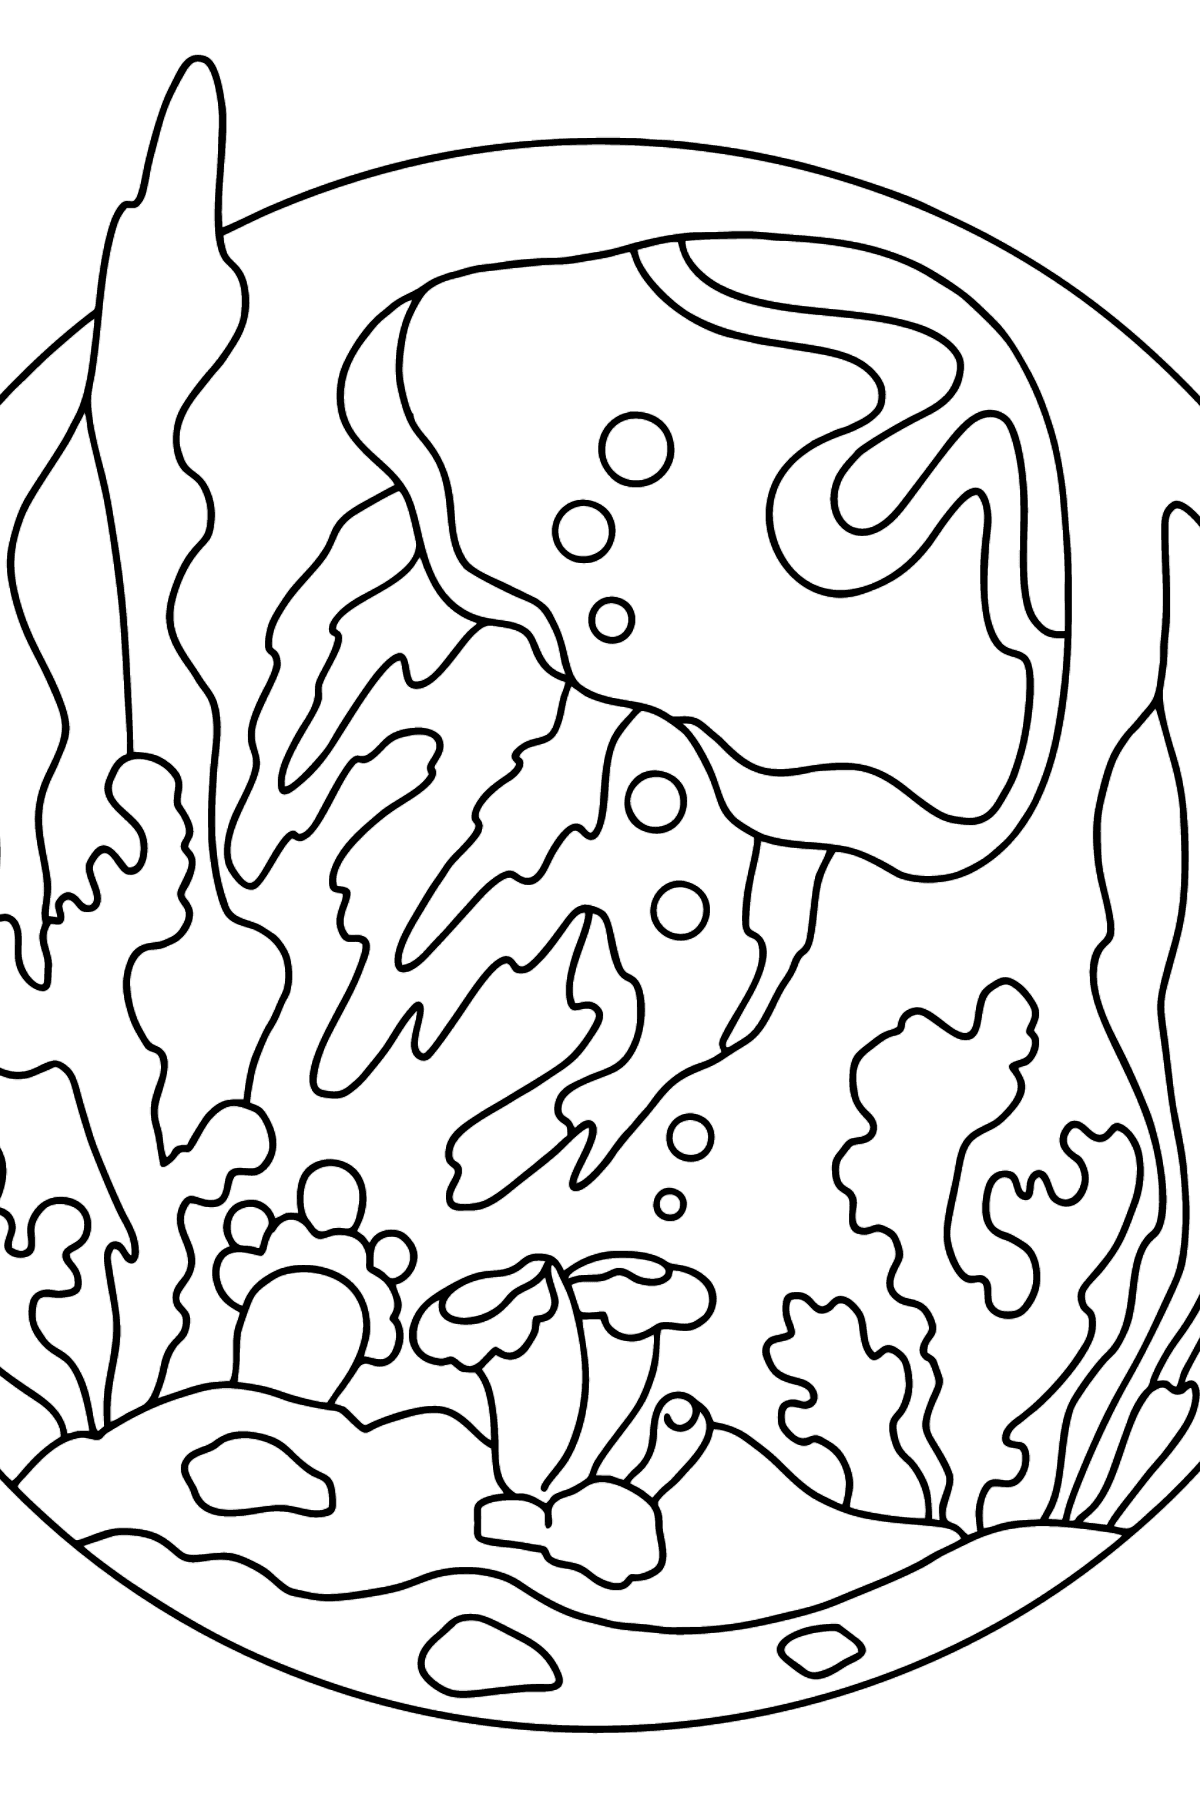 Jellyfish Coloring Page - Coloring Pages for Kids